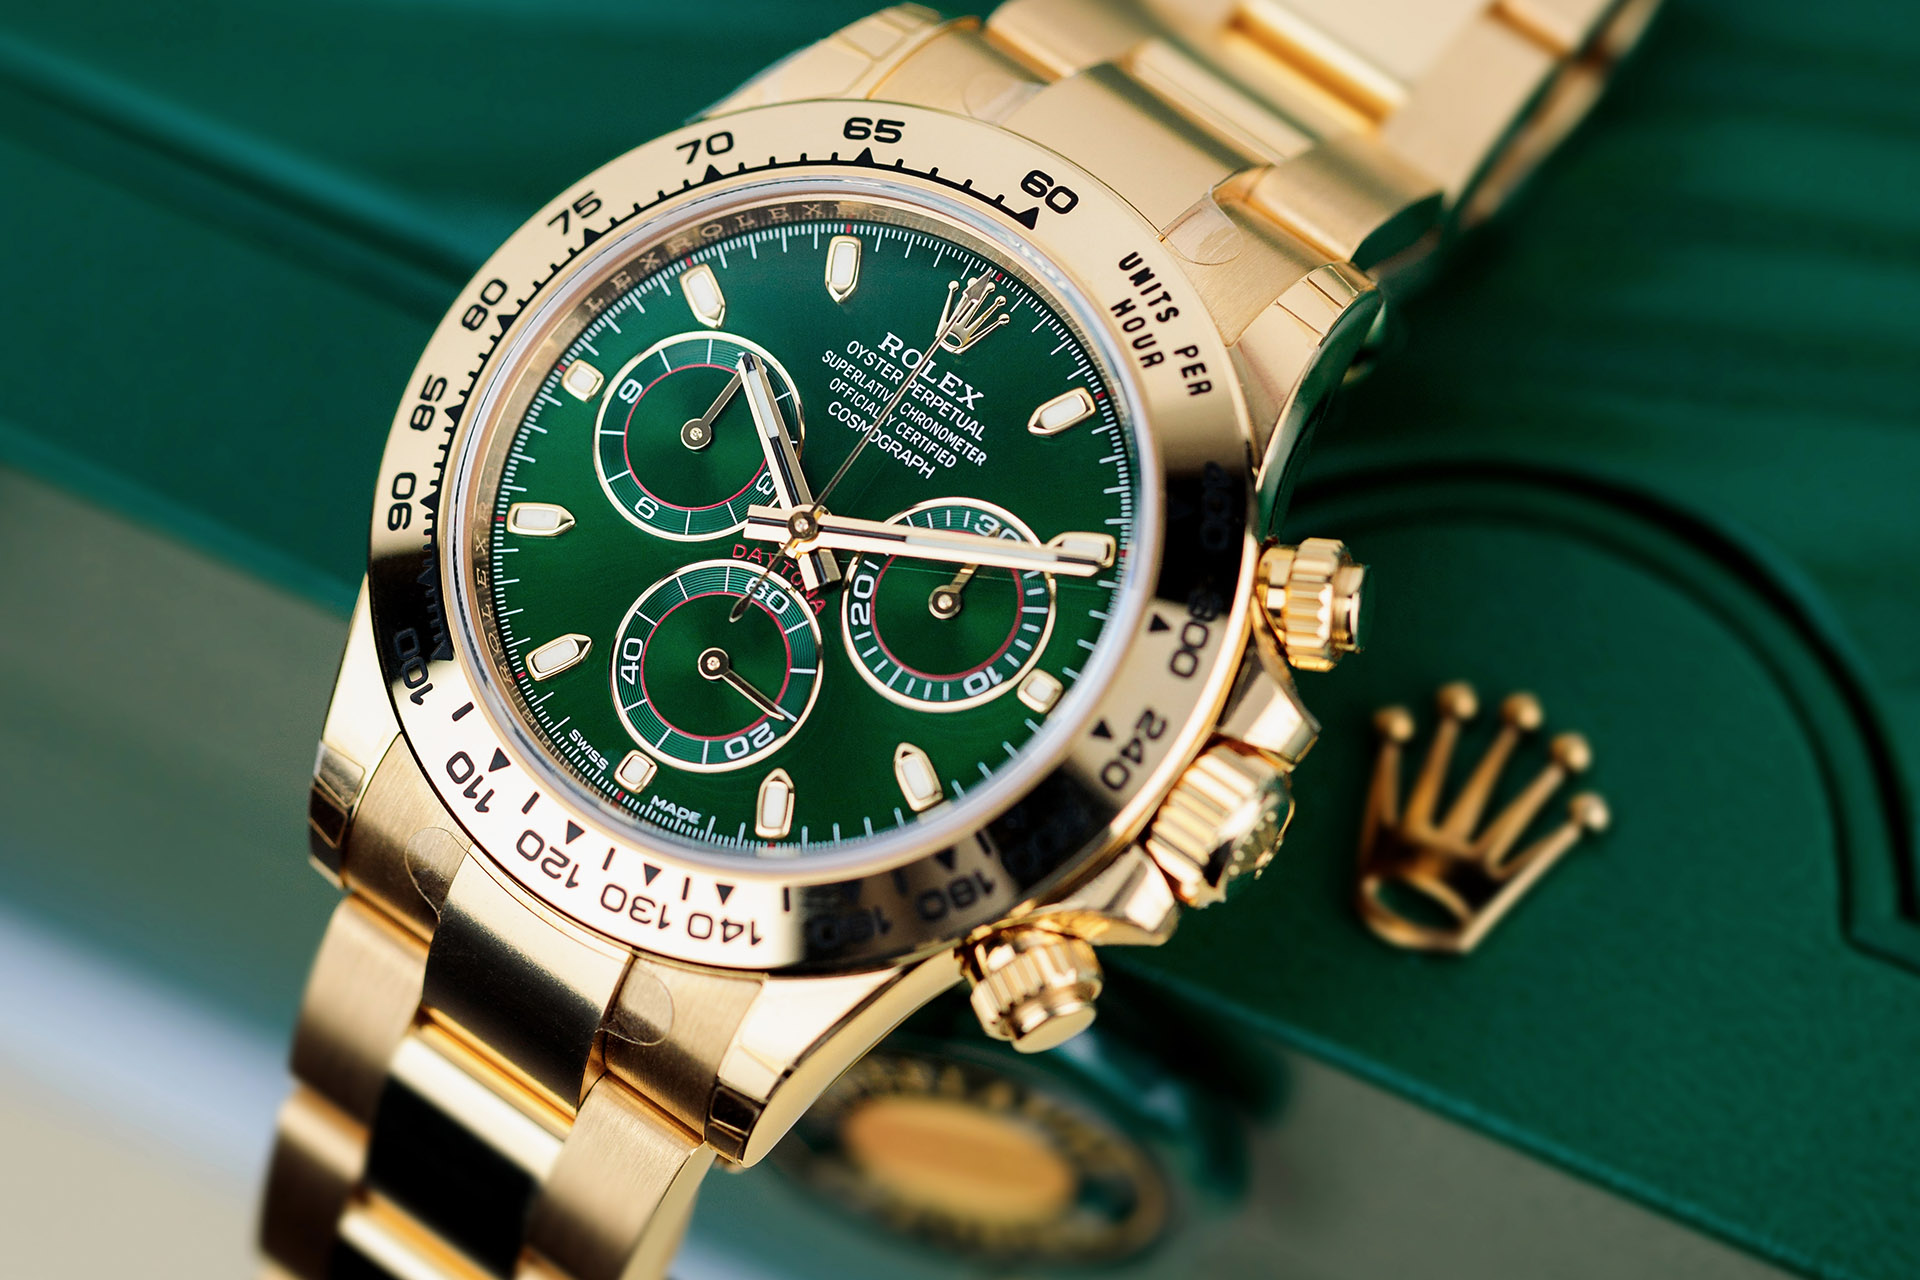 HYPE OR HOT: Why Are Rolex Watches So Expensive?